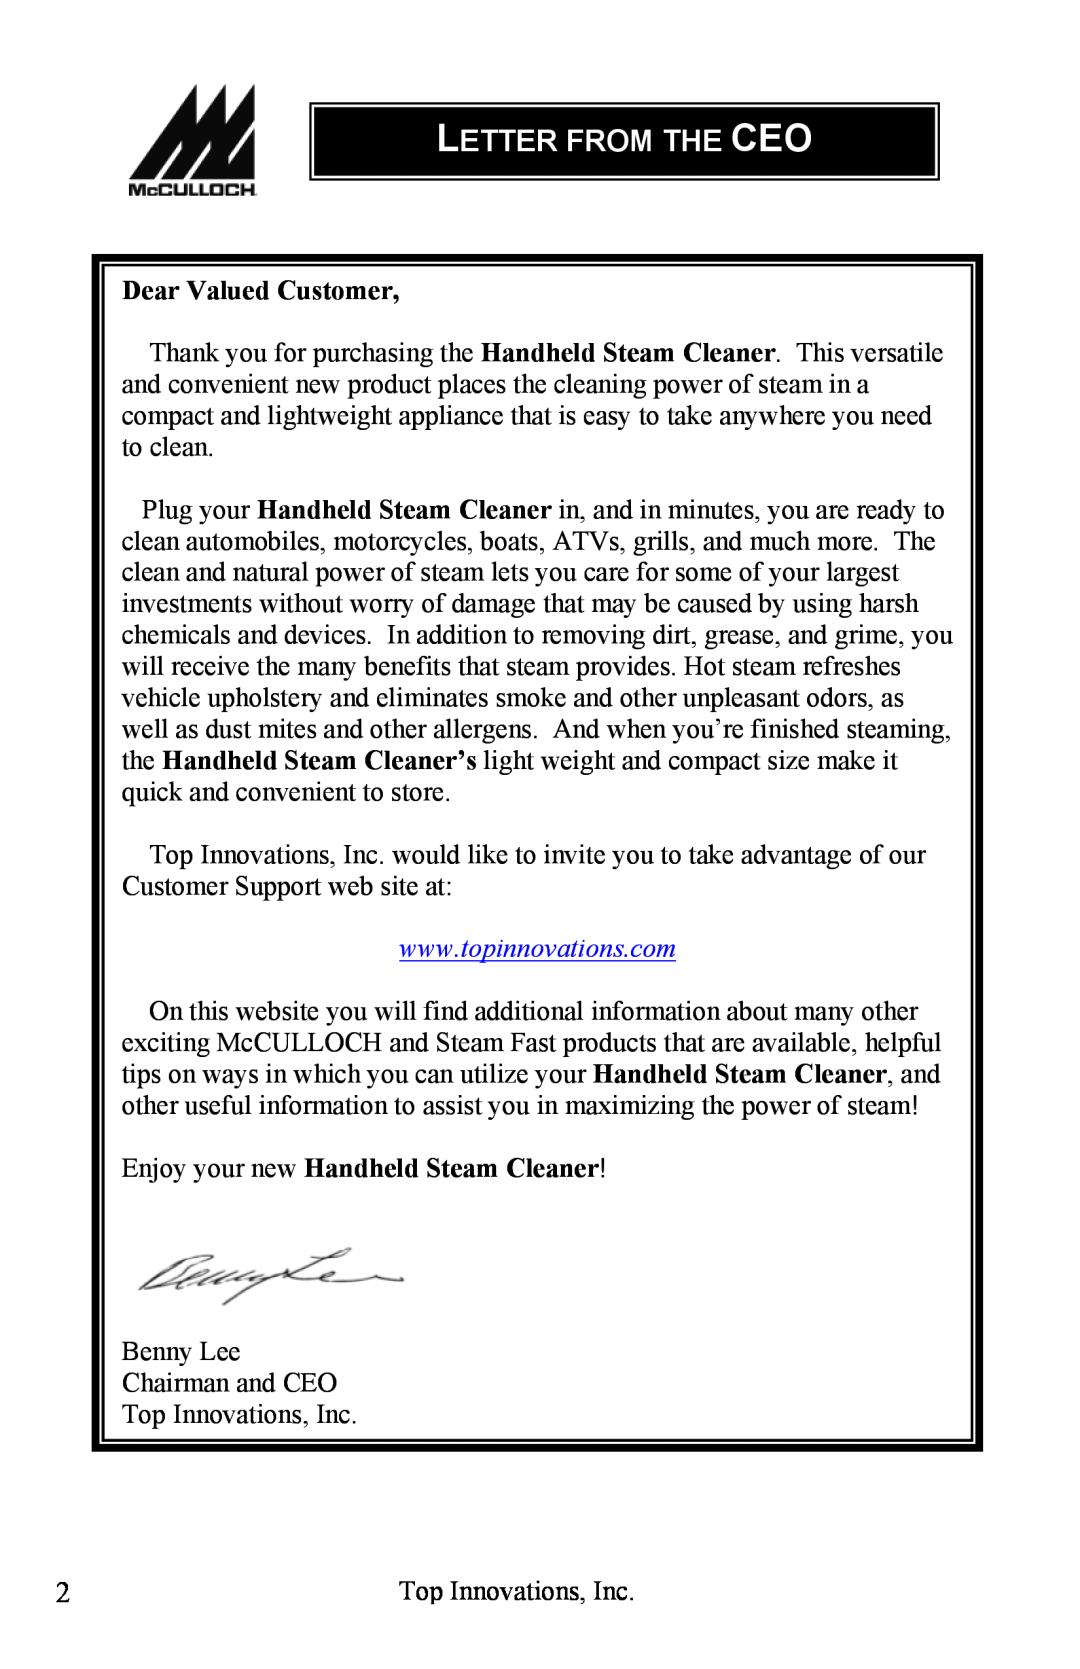 Top Innovations MC1227 warranty Letter From The Ceo, Dear Valued Customer, Enjoy your new Handheld Steam Cleaner 